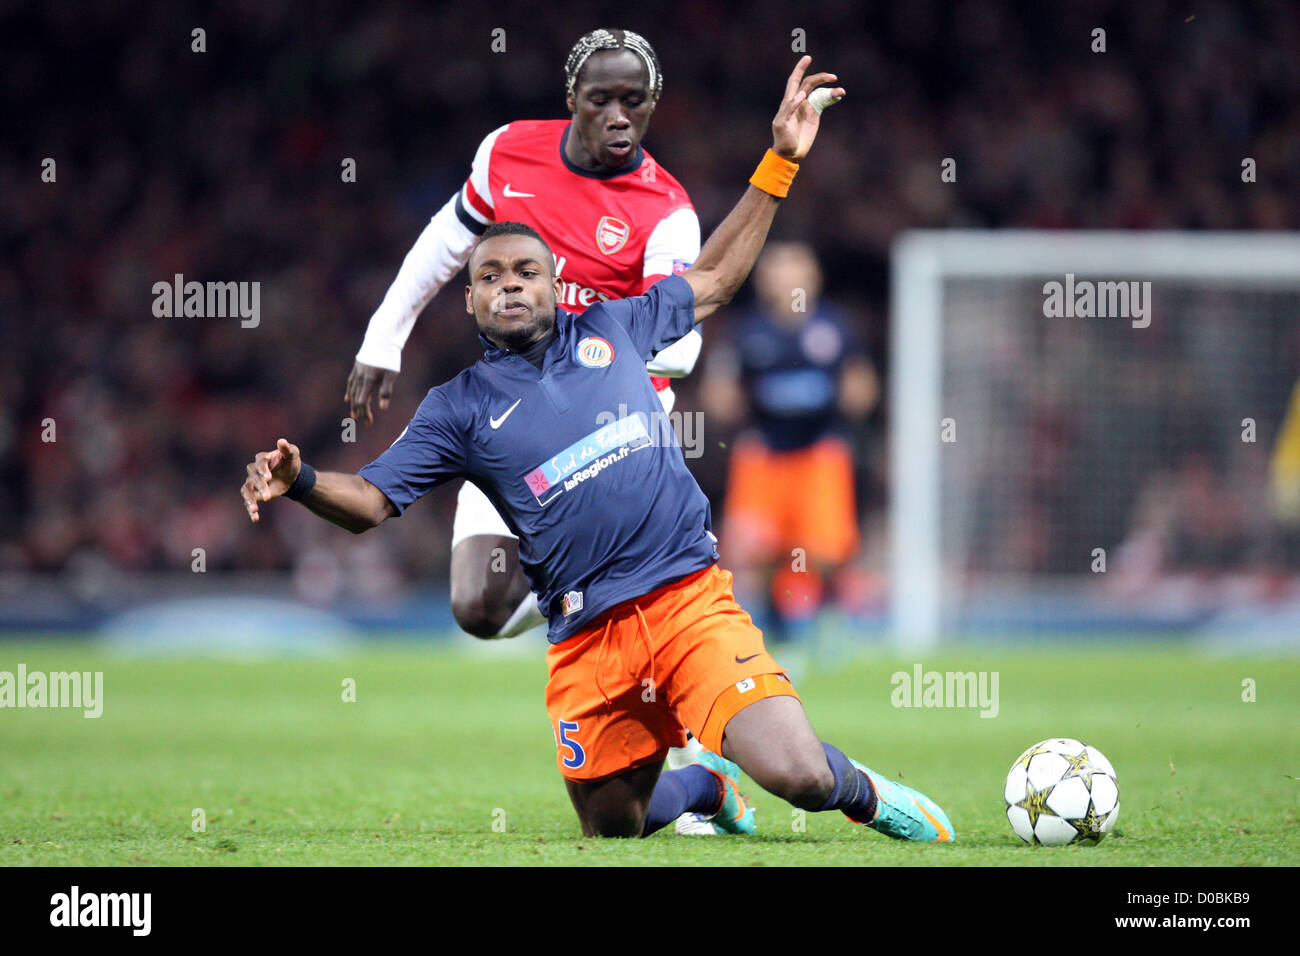 21.11.2012 London, England.  Bacary Sagna of Arsenal and Henri Bedimo of Montpellier HSC in action during the Champions League Group B game between Arsenal and Montpellier HSC from Emirates Stadium. Stock Photo